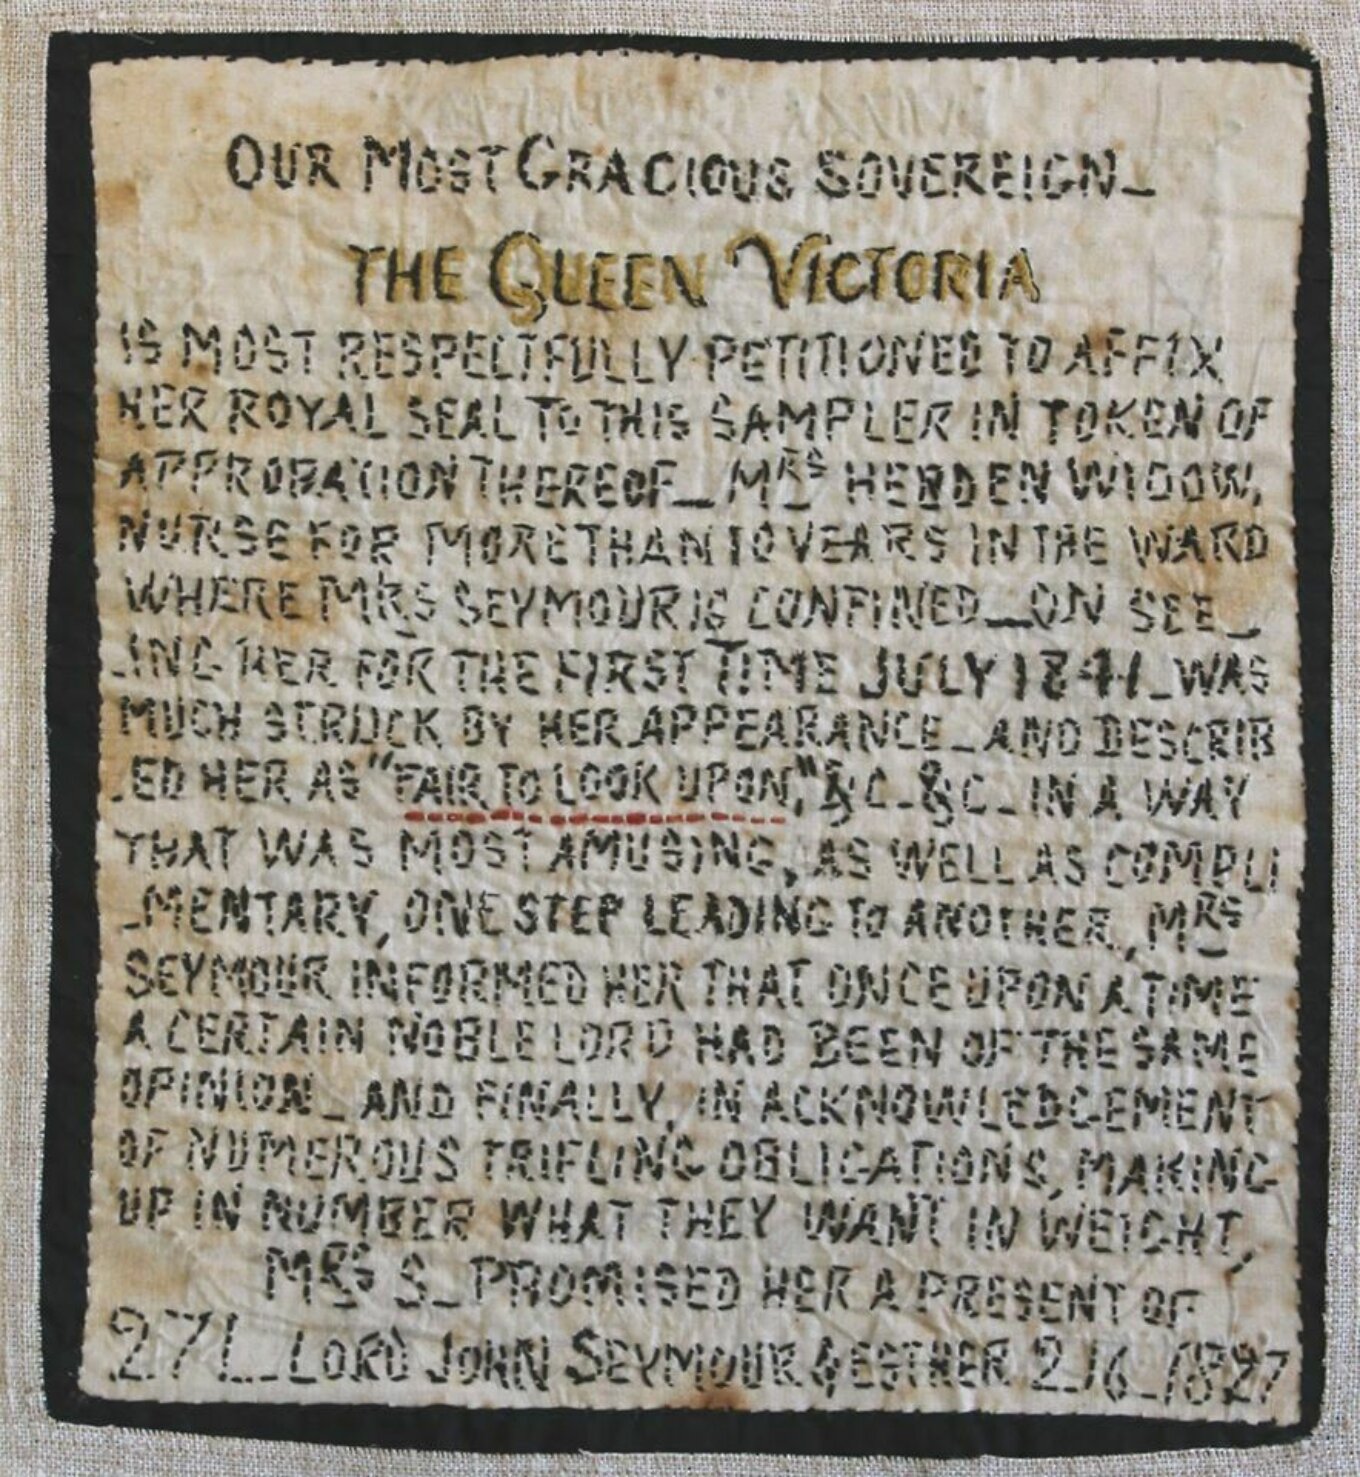 Hand-stitched petition, dark thread on light linen cloth. The petition reads: ‘Our Most Gracious Sovereign, the Queen Victoria, is most respectfully petitioned to affix her royal assent to this sampler in token of approbation thereof. Mrs Herden widow, nurse for more than 10 years in the ward where Mrs Seymour is confined. On seeing her for the first time, July 1841, was much struck by her appearance, and described her as “fair to look upon”, etc, etc, in a way that was most amusing, as well as complimentary, one step leading to another, Mrs Seymour informed her that once upon a time a certain noble lord had been of the same opinion. And finally, in acknowledgement of numerous trifling obligations, making up in number what they want in weight, Mrs S. promised her a present of 27£ Lord John Seymour & Esther 2.16. 1827.’